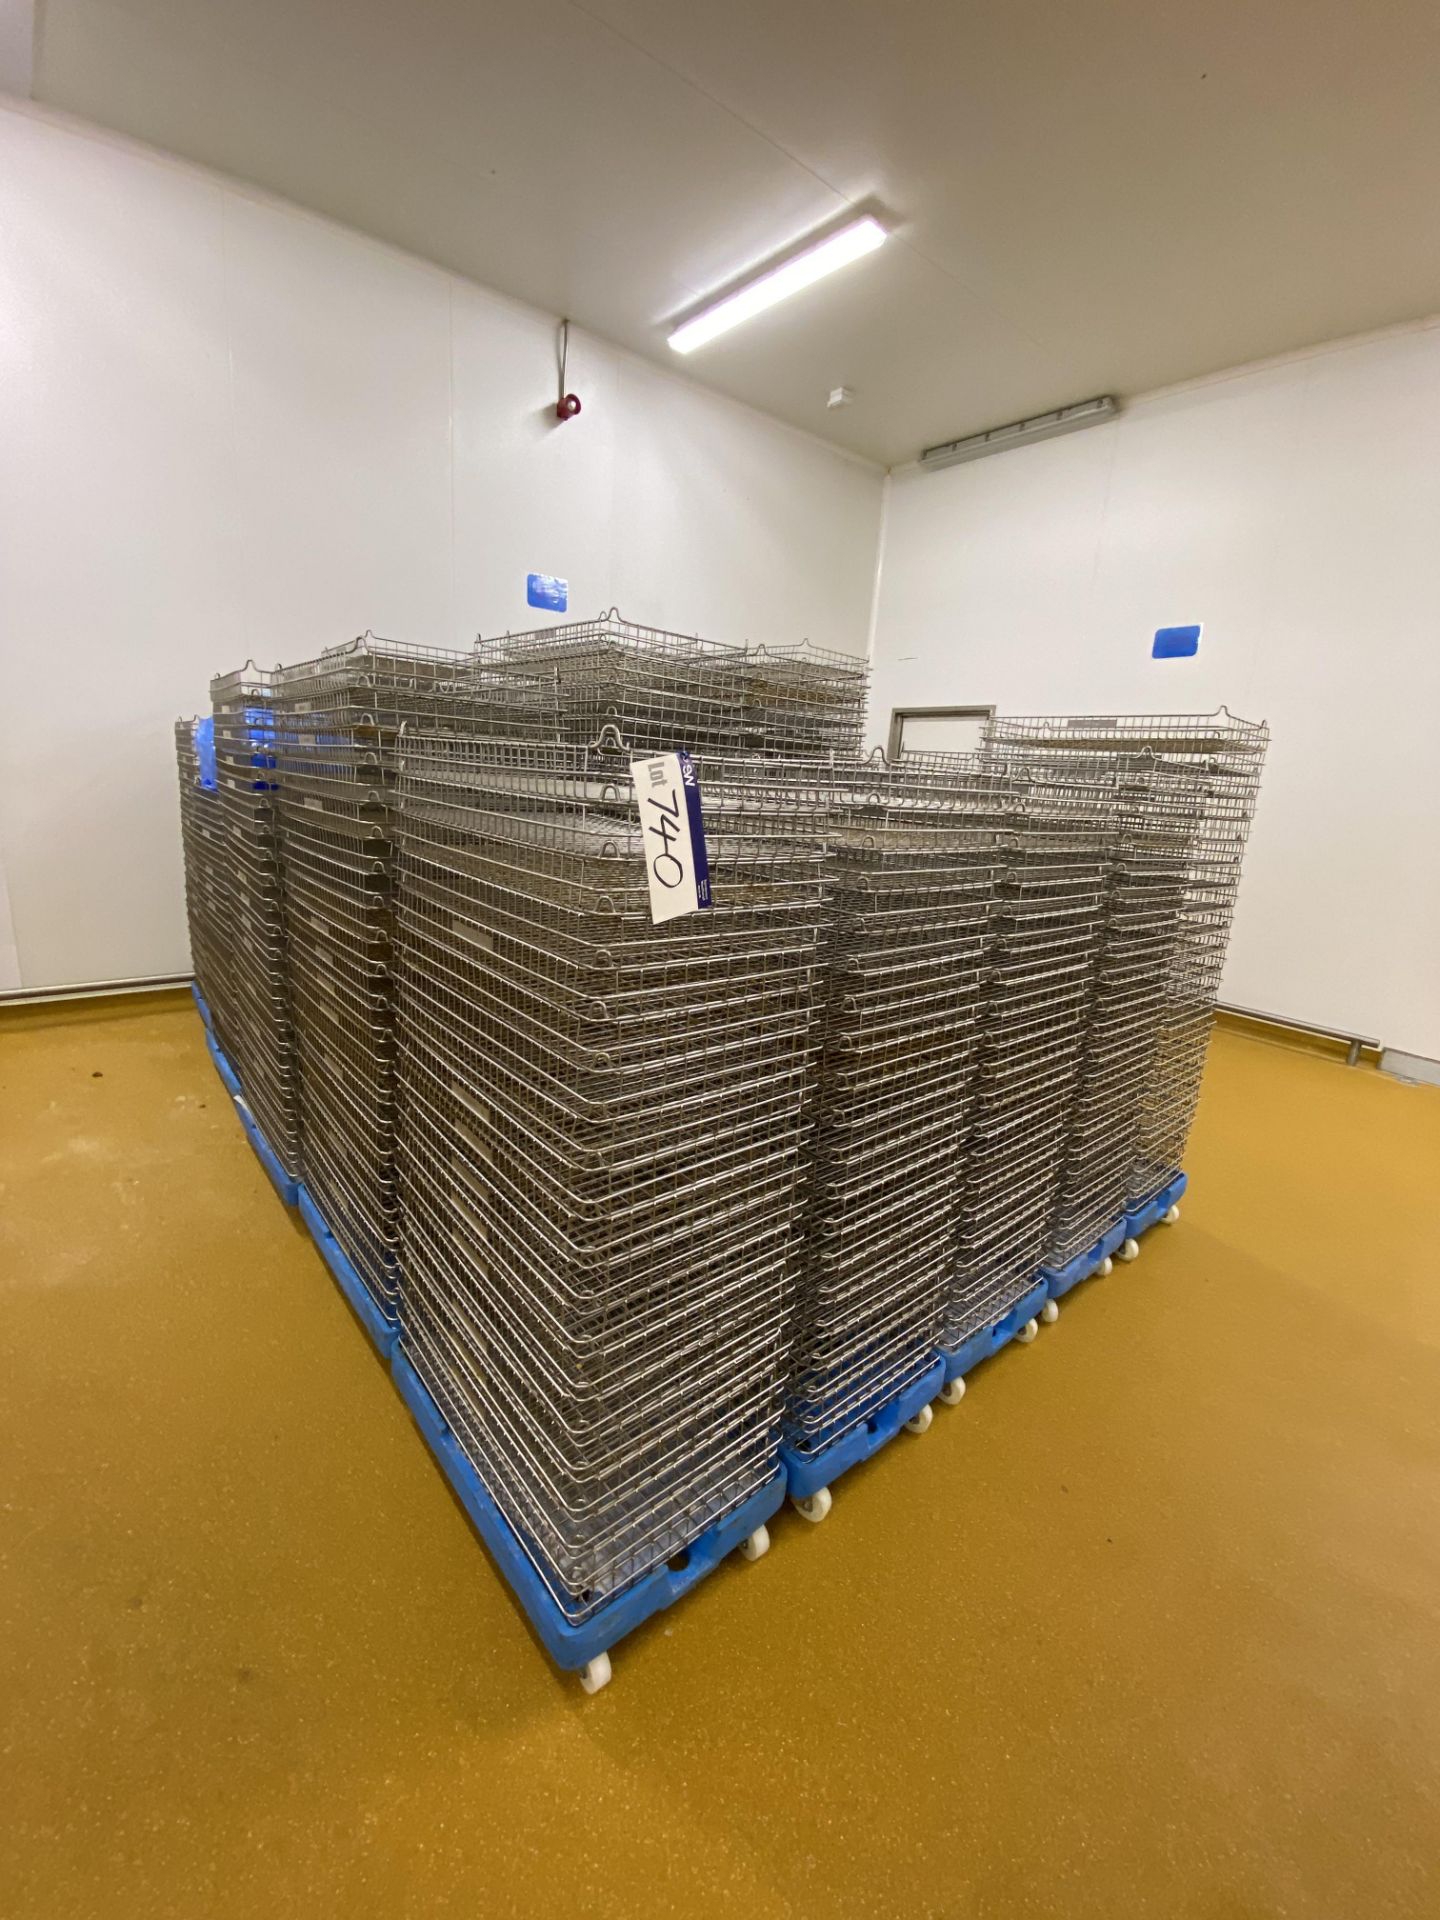 Quantity of Stainless Steel Wire Mesh Baking Trays, each approx. 740mm x 460mm, with 29 plastic